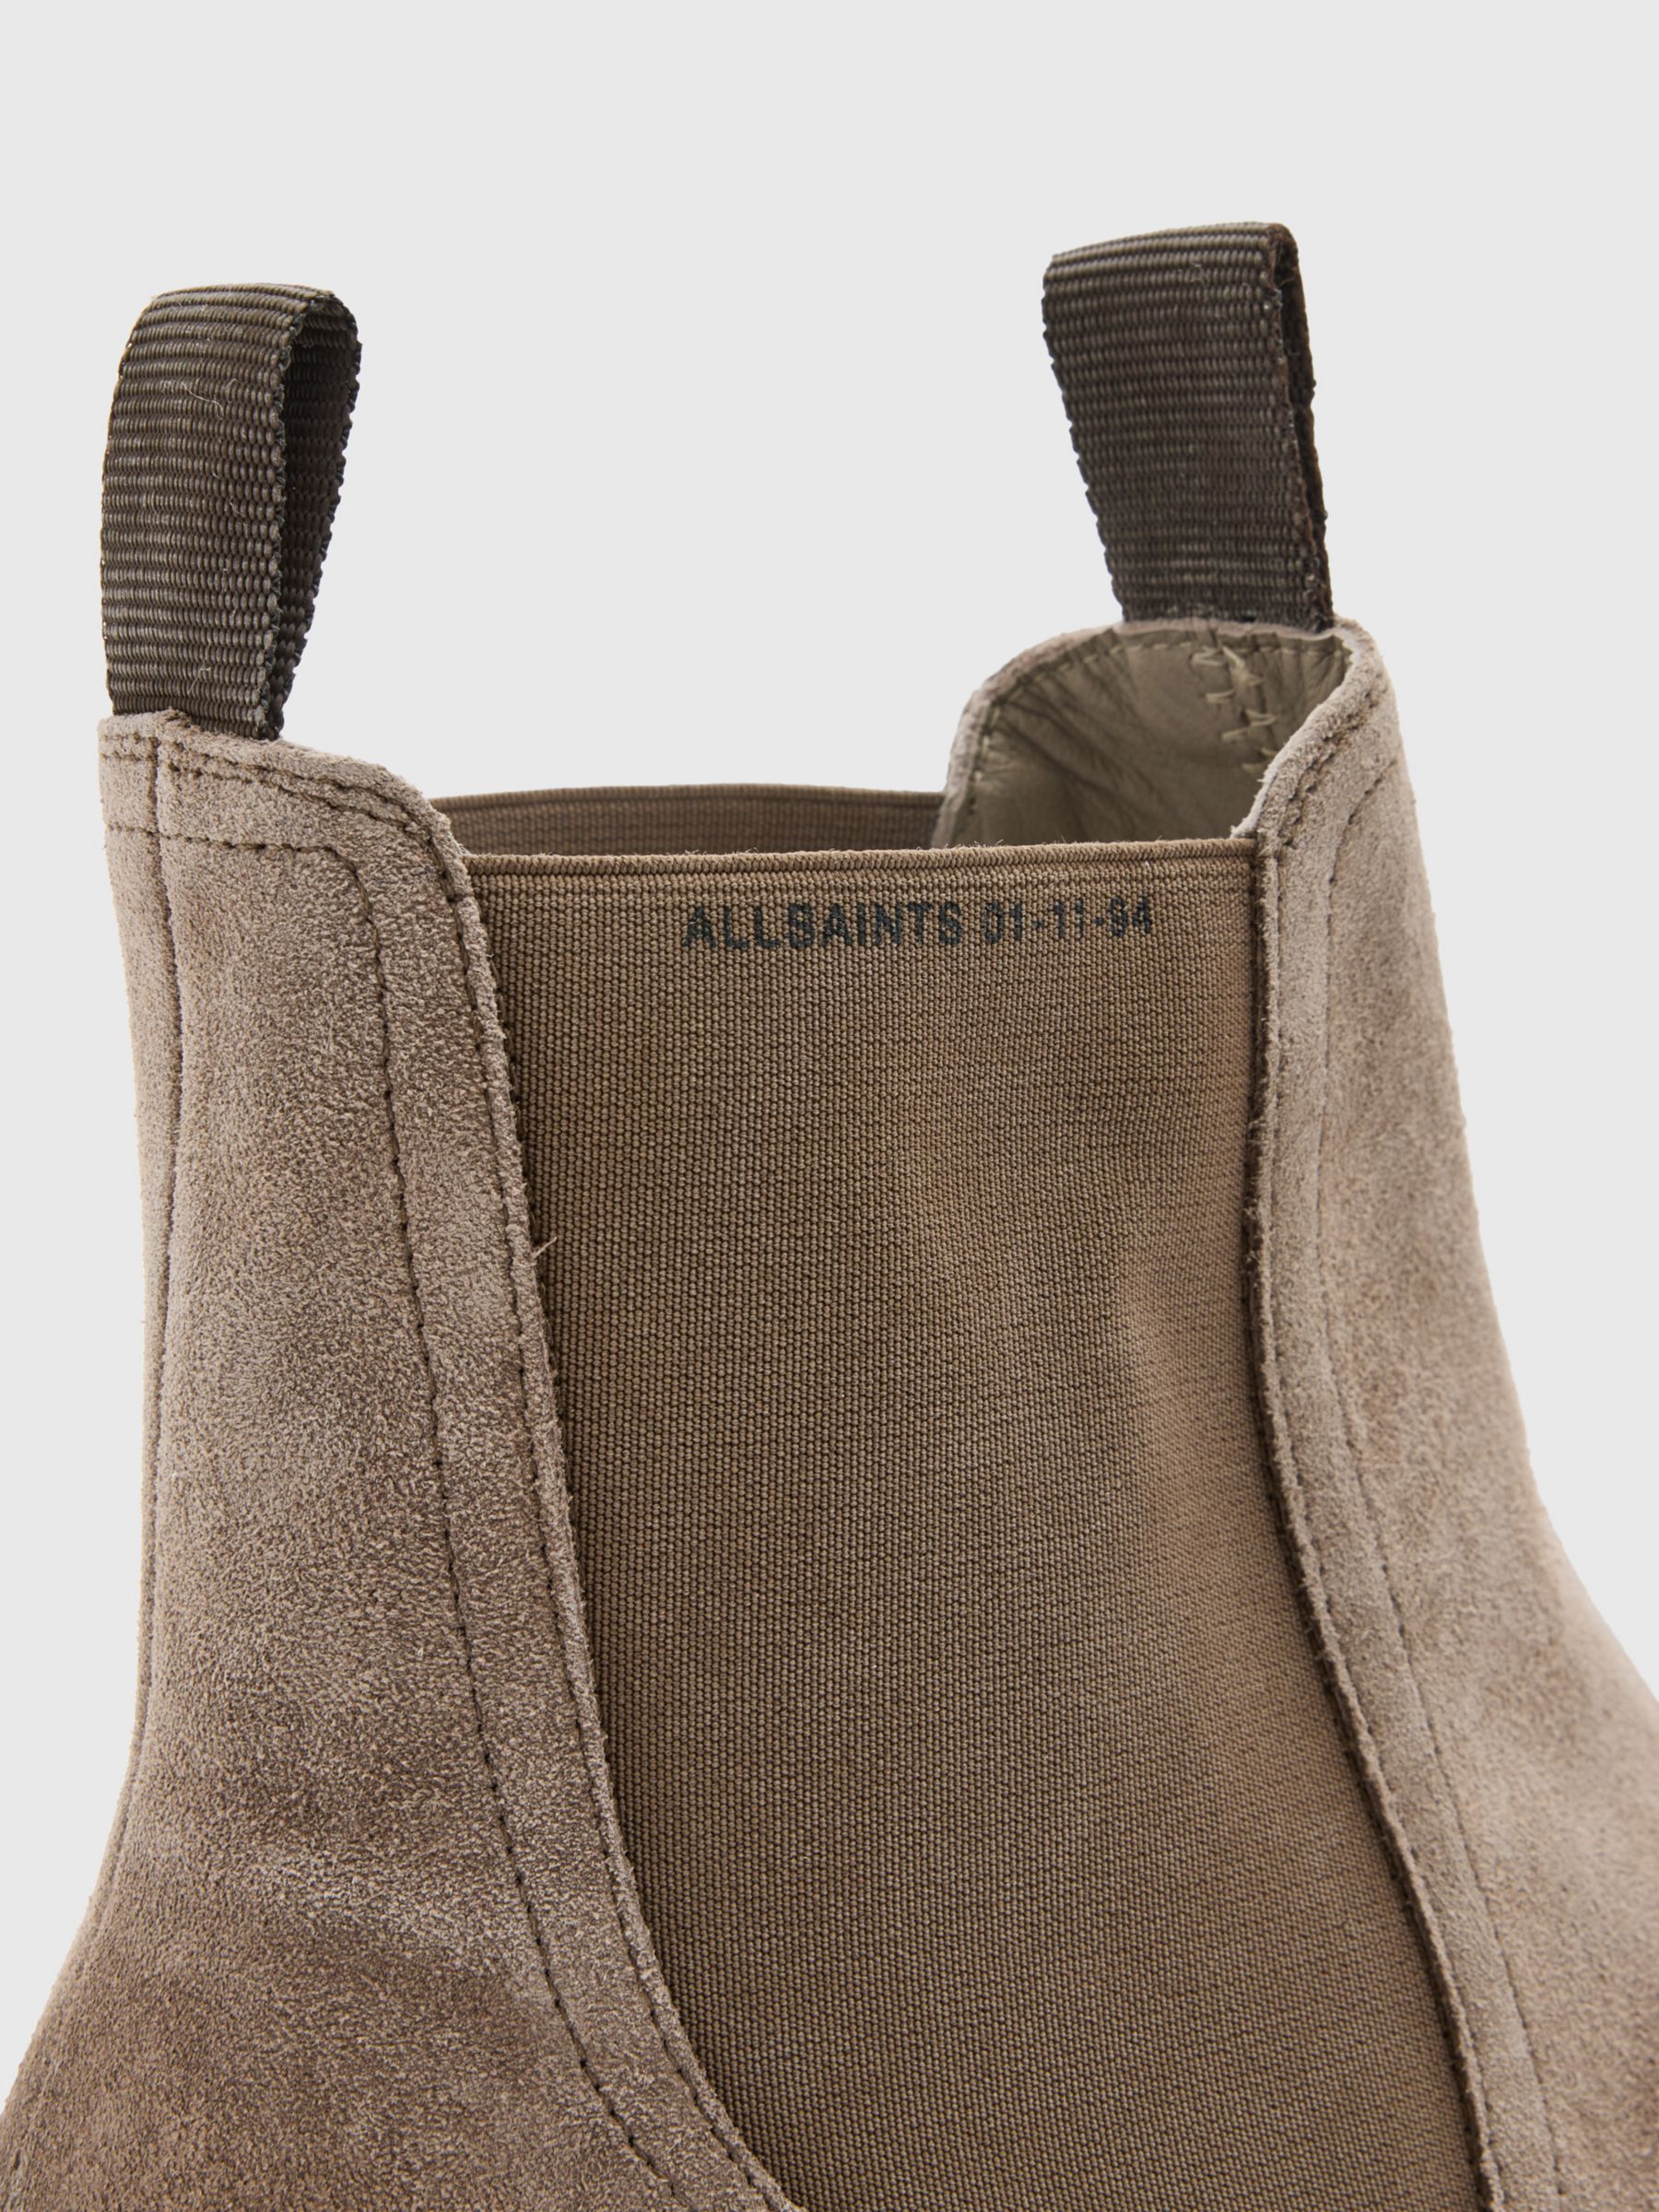 AllSaints Driver Suede Chelsea Boots, Taupe, 10